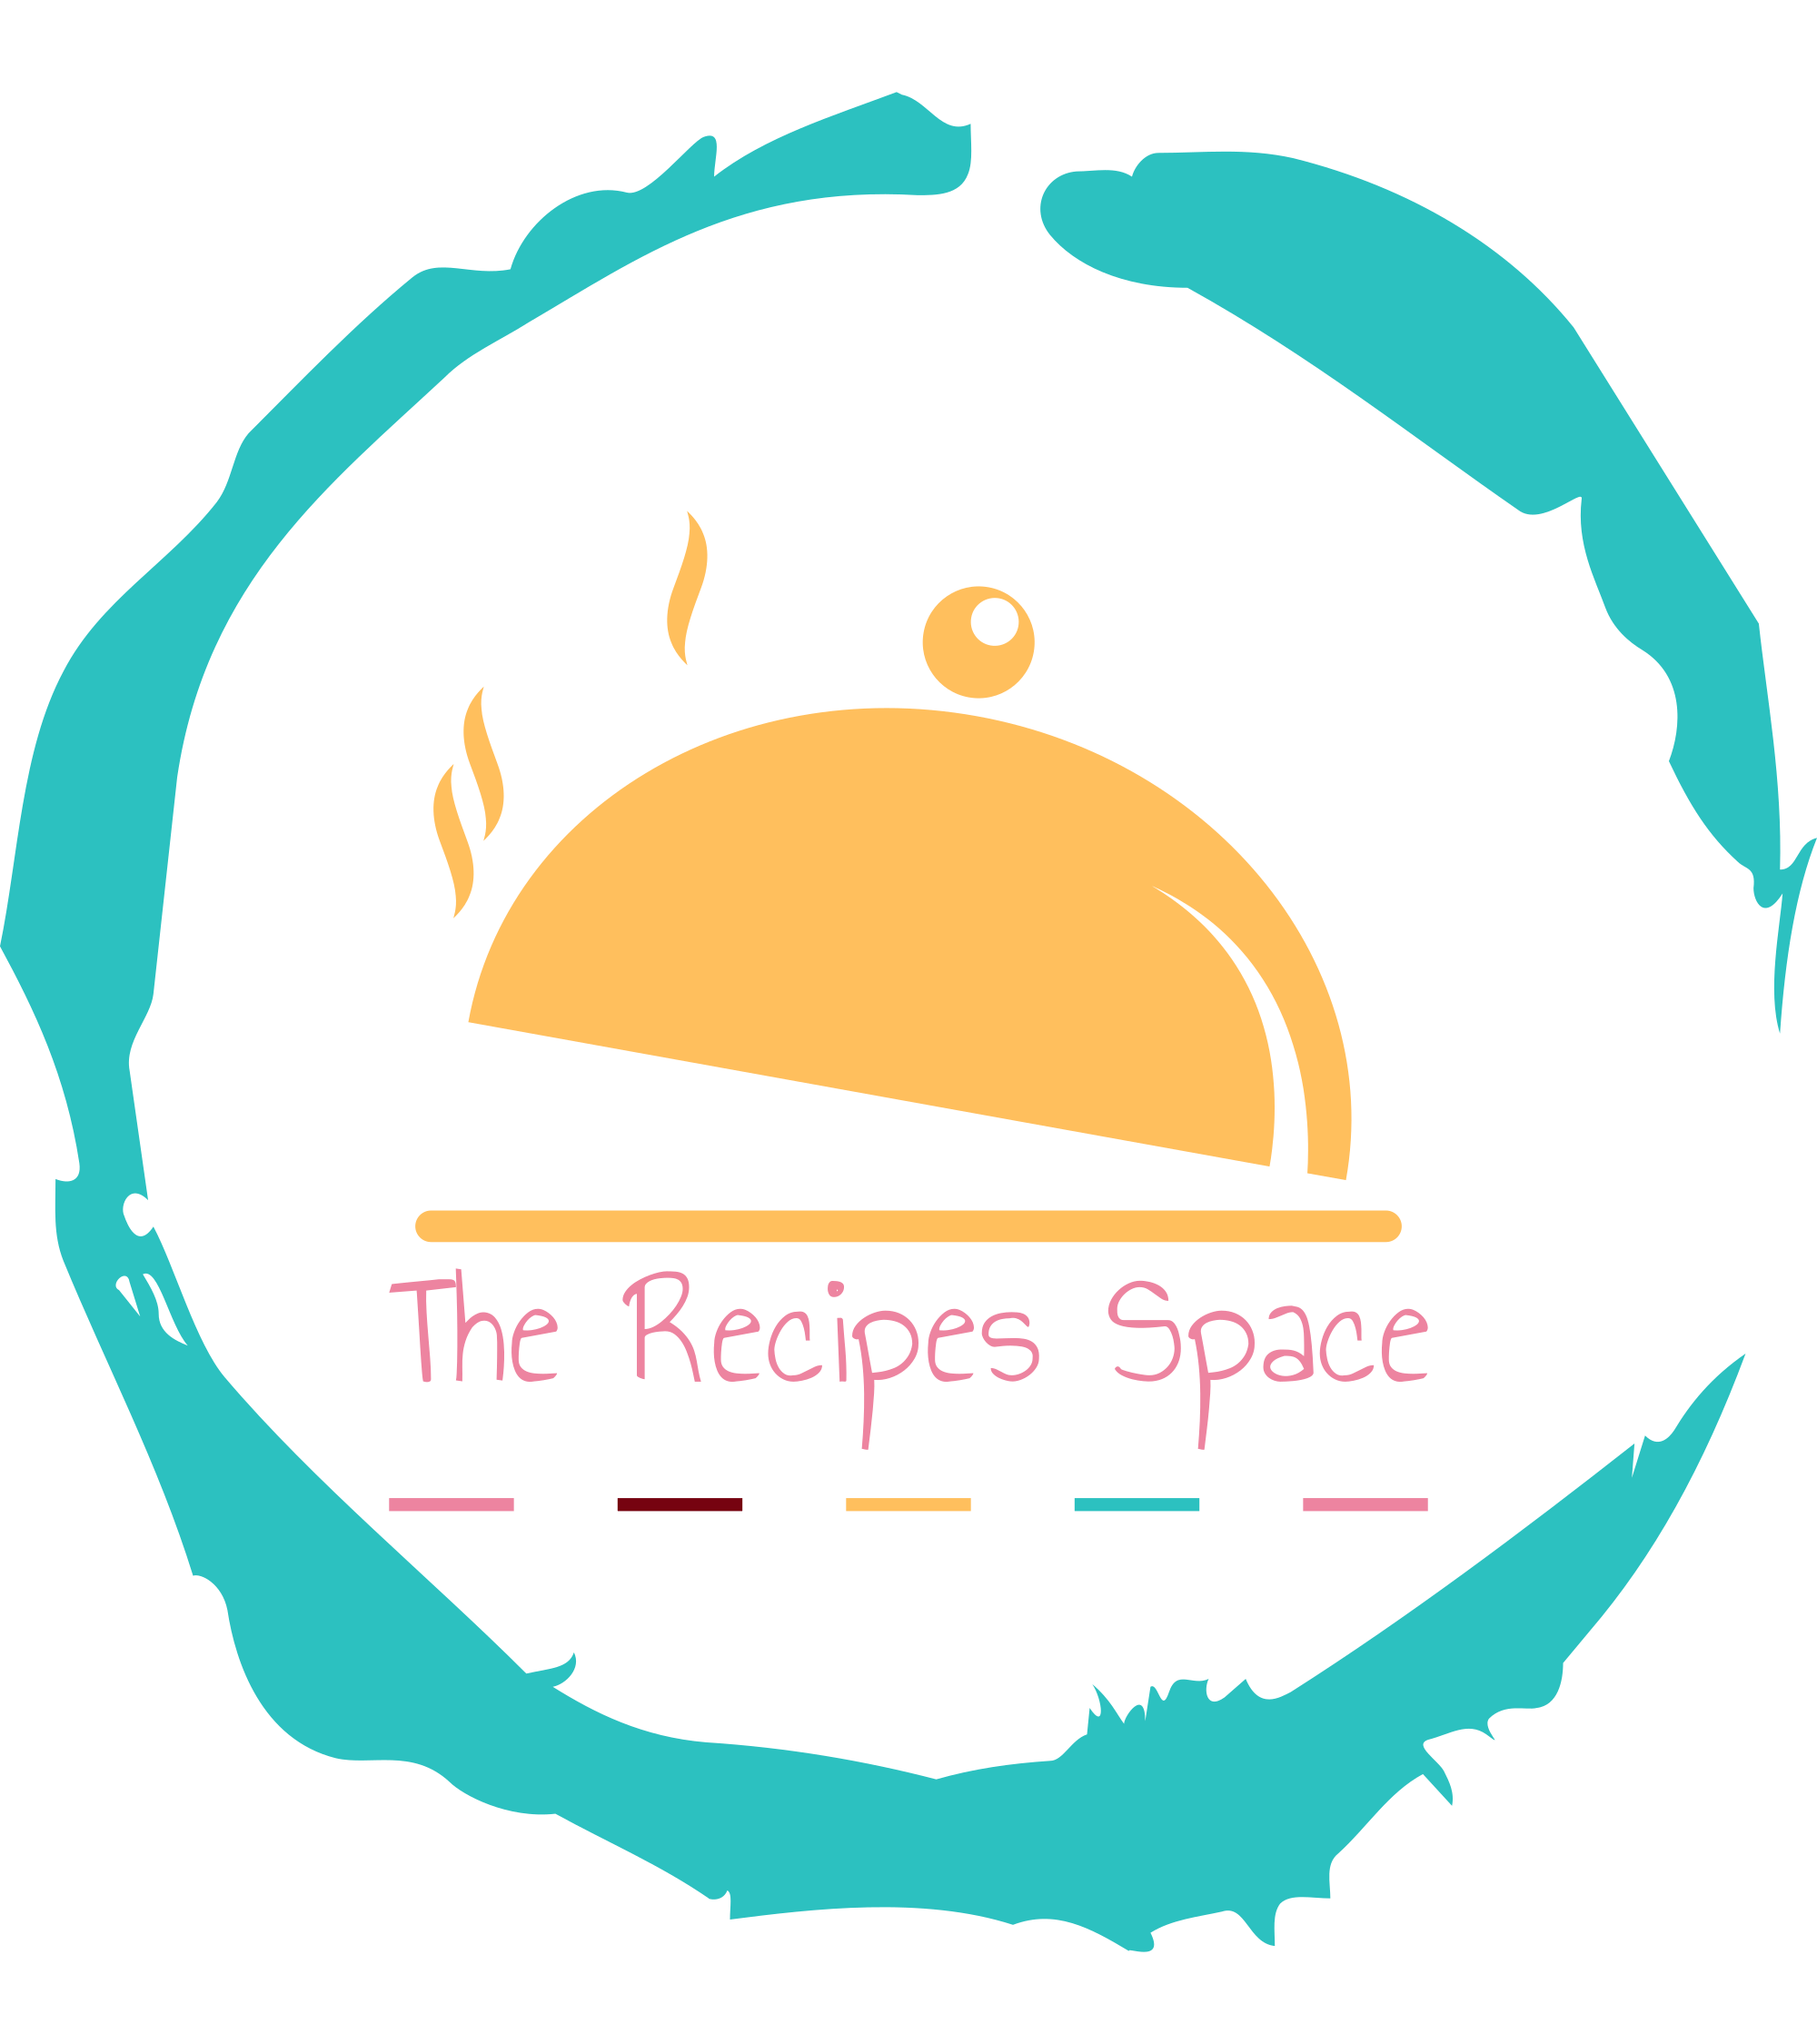 The Recipes Space